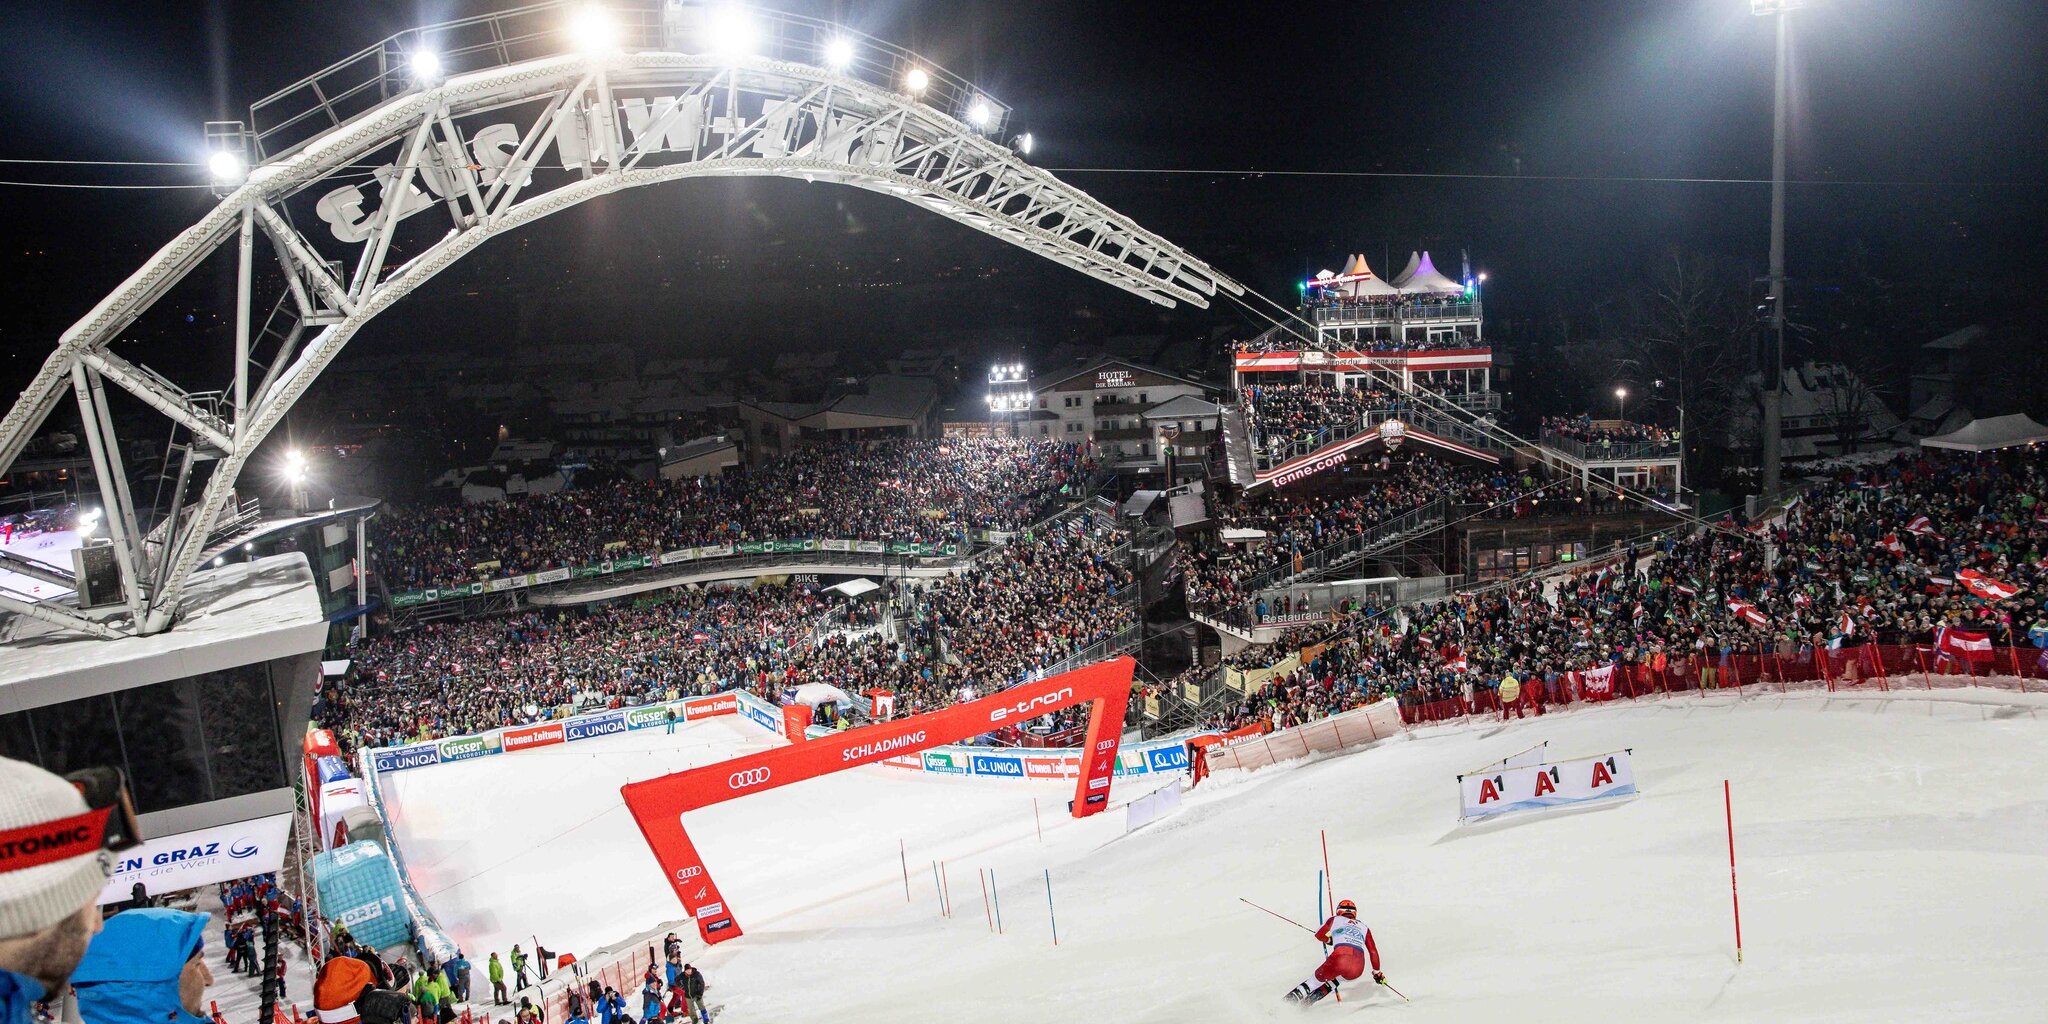 Kép: The Nightrace Schladming